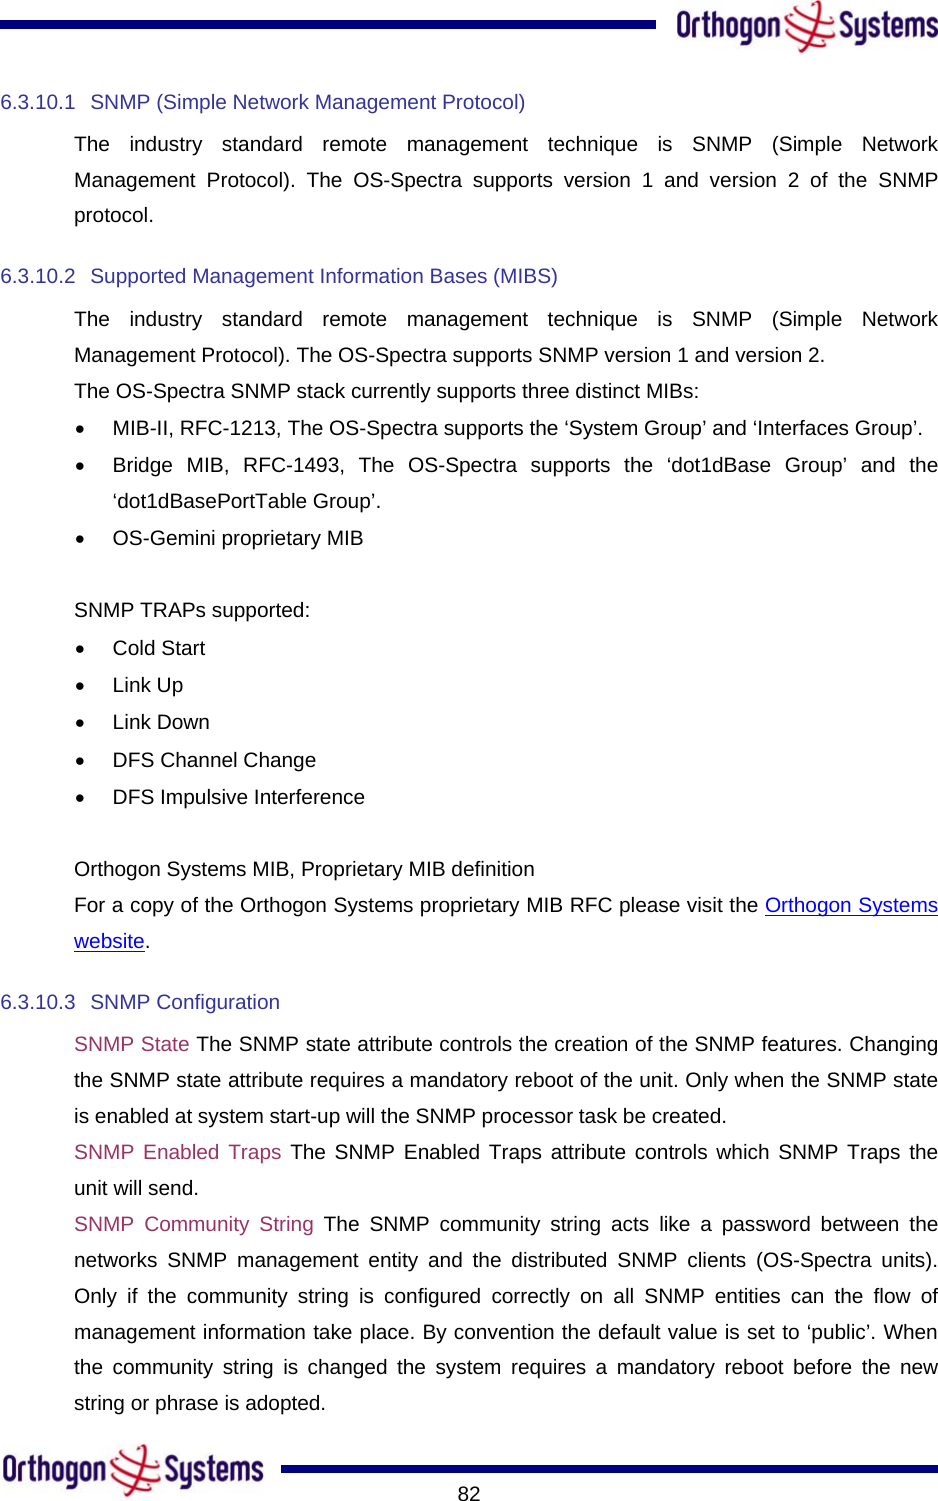       826.3.10.1  SNMP (Simple Network Management Protocol) The industry standard remote management technique is SNMP (Simple Network Management Protocol). The OS-Spectra supports version 1 and version 2 of the SNMP protocol. 6.3.10.2 Supported Management Information Bases (MIBS) The industry standard remote management technique is SNMP (Simple Network Management Protocol). The OS-Spectra supports SNMP version 1 and version 2. The OS-Spectra SNMP stack currently supports three distinct MIBs: •  MIB-II, RFC-1213, The OS-Spectra supports the ‘System Group’ and ‘Interfaces Group’. •  Bridge MIB, RFC-1493, The OS-Spectra supports the ‘dot1dBase Group’ and the ‘dot1dBasePortTable Group’. •  OS-Gemini proprietary MIB  SNMP TRAPs supported: •  Cold Start •  Link Up •  Link Down •  DFS Channel Change  •  DFS Impulsive Interference  Orthogon Systems MIB, Proprietary MIB definition For a copy of the Orthogon Systems proprietary MIB RFC please visit the Orthogon Systems website. 6.3.10.3 SNMP Configuration SNMP State The SNMP state attribute controls the creation of the SNMP features. Changing the SNMP state attribute requires a mandatory reboot of the unit. Only when the SNMP state is enabled at system start-up will the SNMP processor task be created. SNMP Enabled Traps The SNMP Enabled Traps attribute controls which SNMP Traps the unit will send. SNMP Community String The SNMP community string acts like a password between the networks SNMP management entity and the distributed SNMP clients (OS-Spectra units). Only if the community string is configured correctly on all SNMP entities can the flow of management information take place. By convention the default value is set to ‘public’. When the community string is changed the system requires a mandatory reboot before the new string or phrase is adopted. 